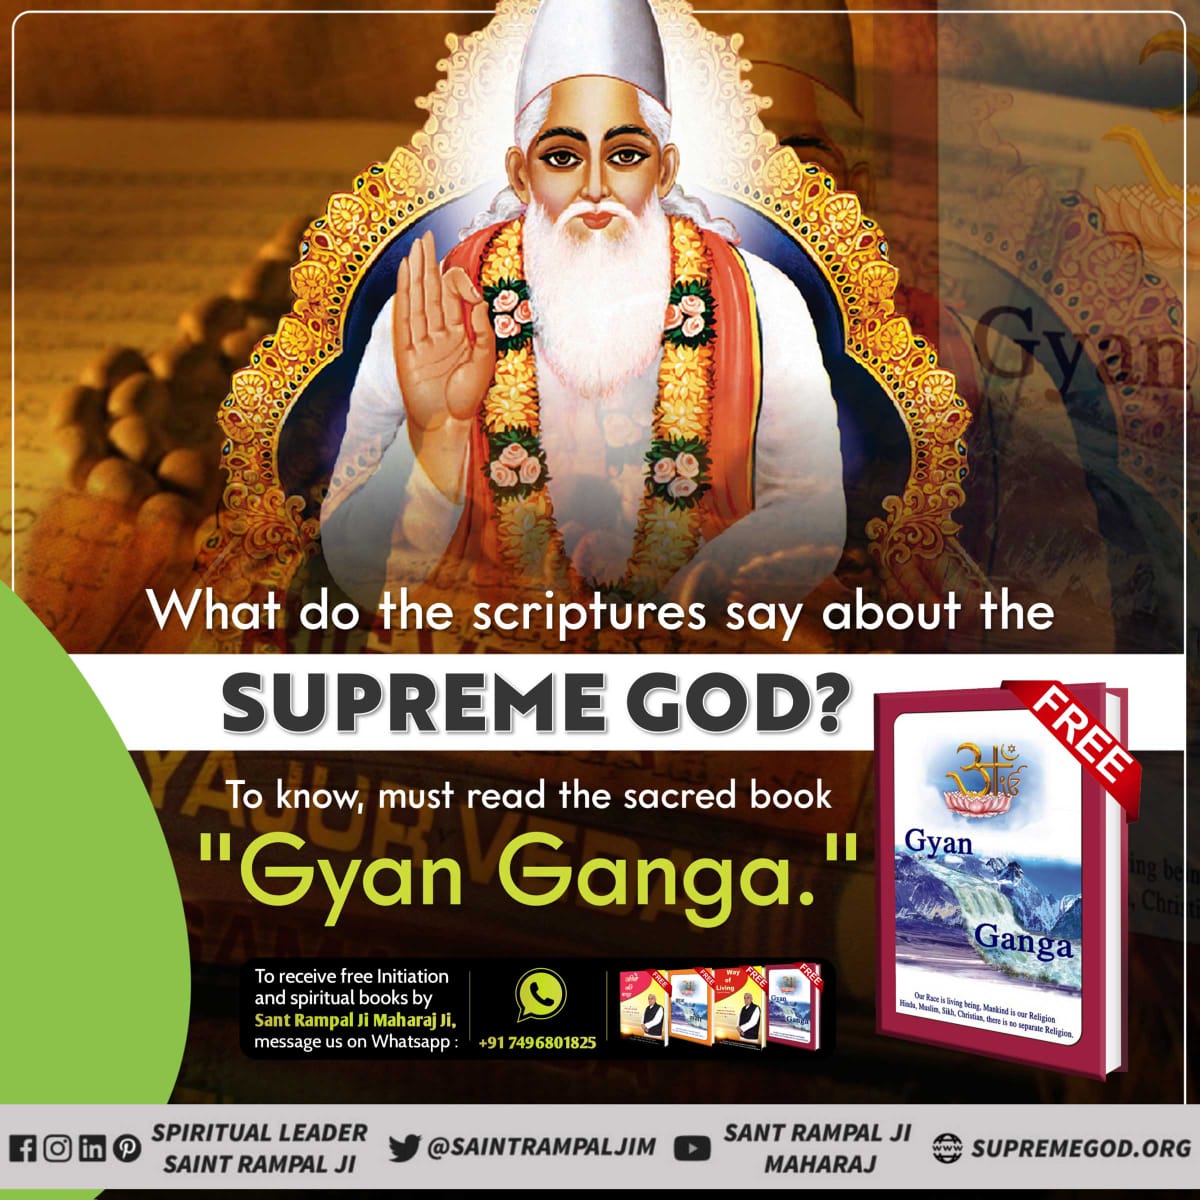 What is the secret behind om mantra to know must read sacred book Gyan ganga #ReadGyanGanga